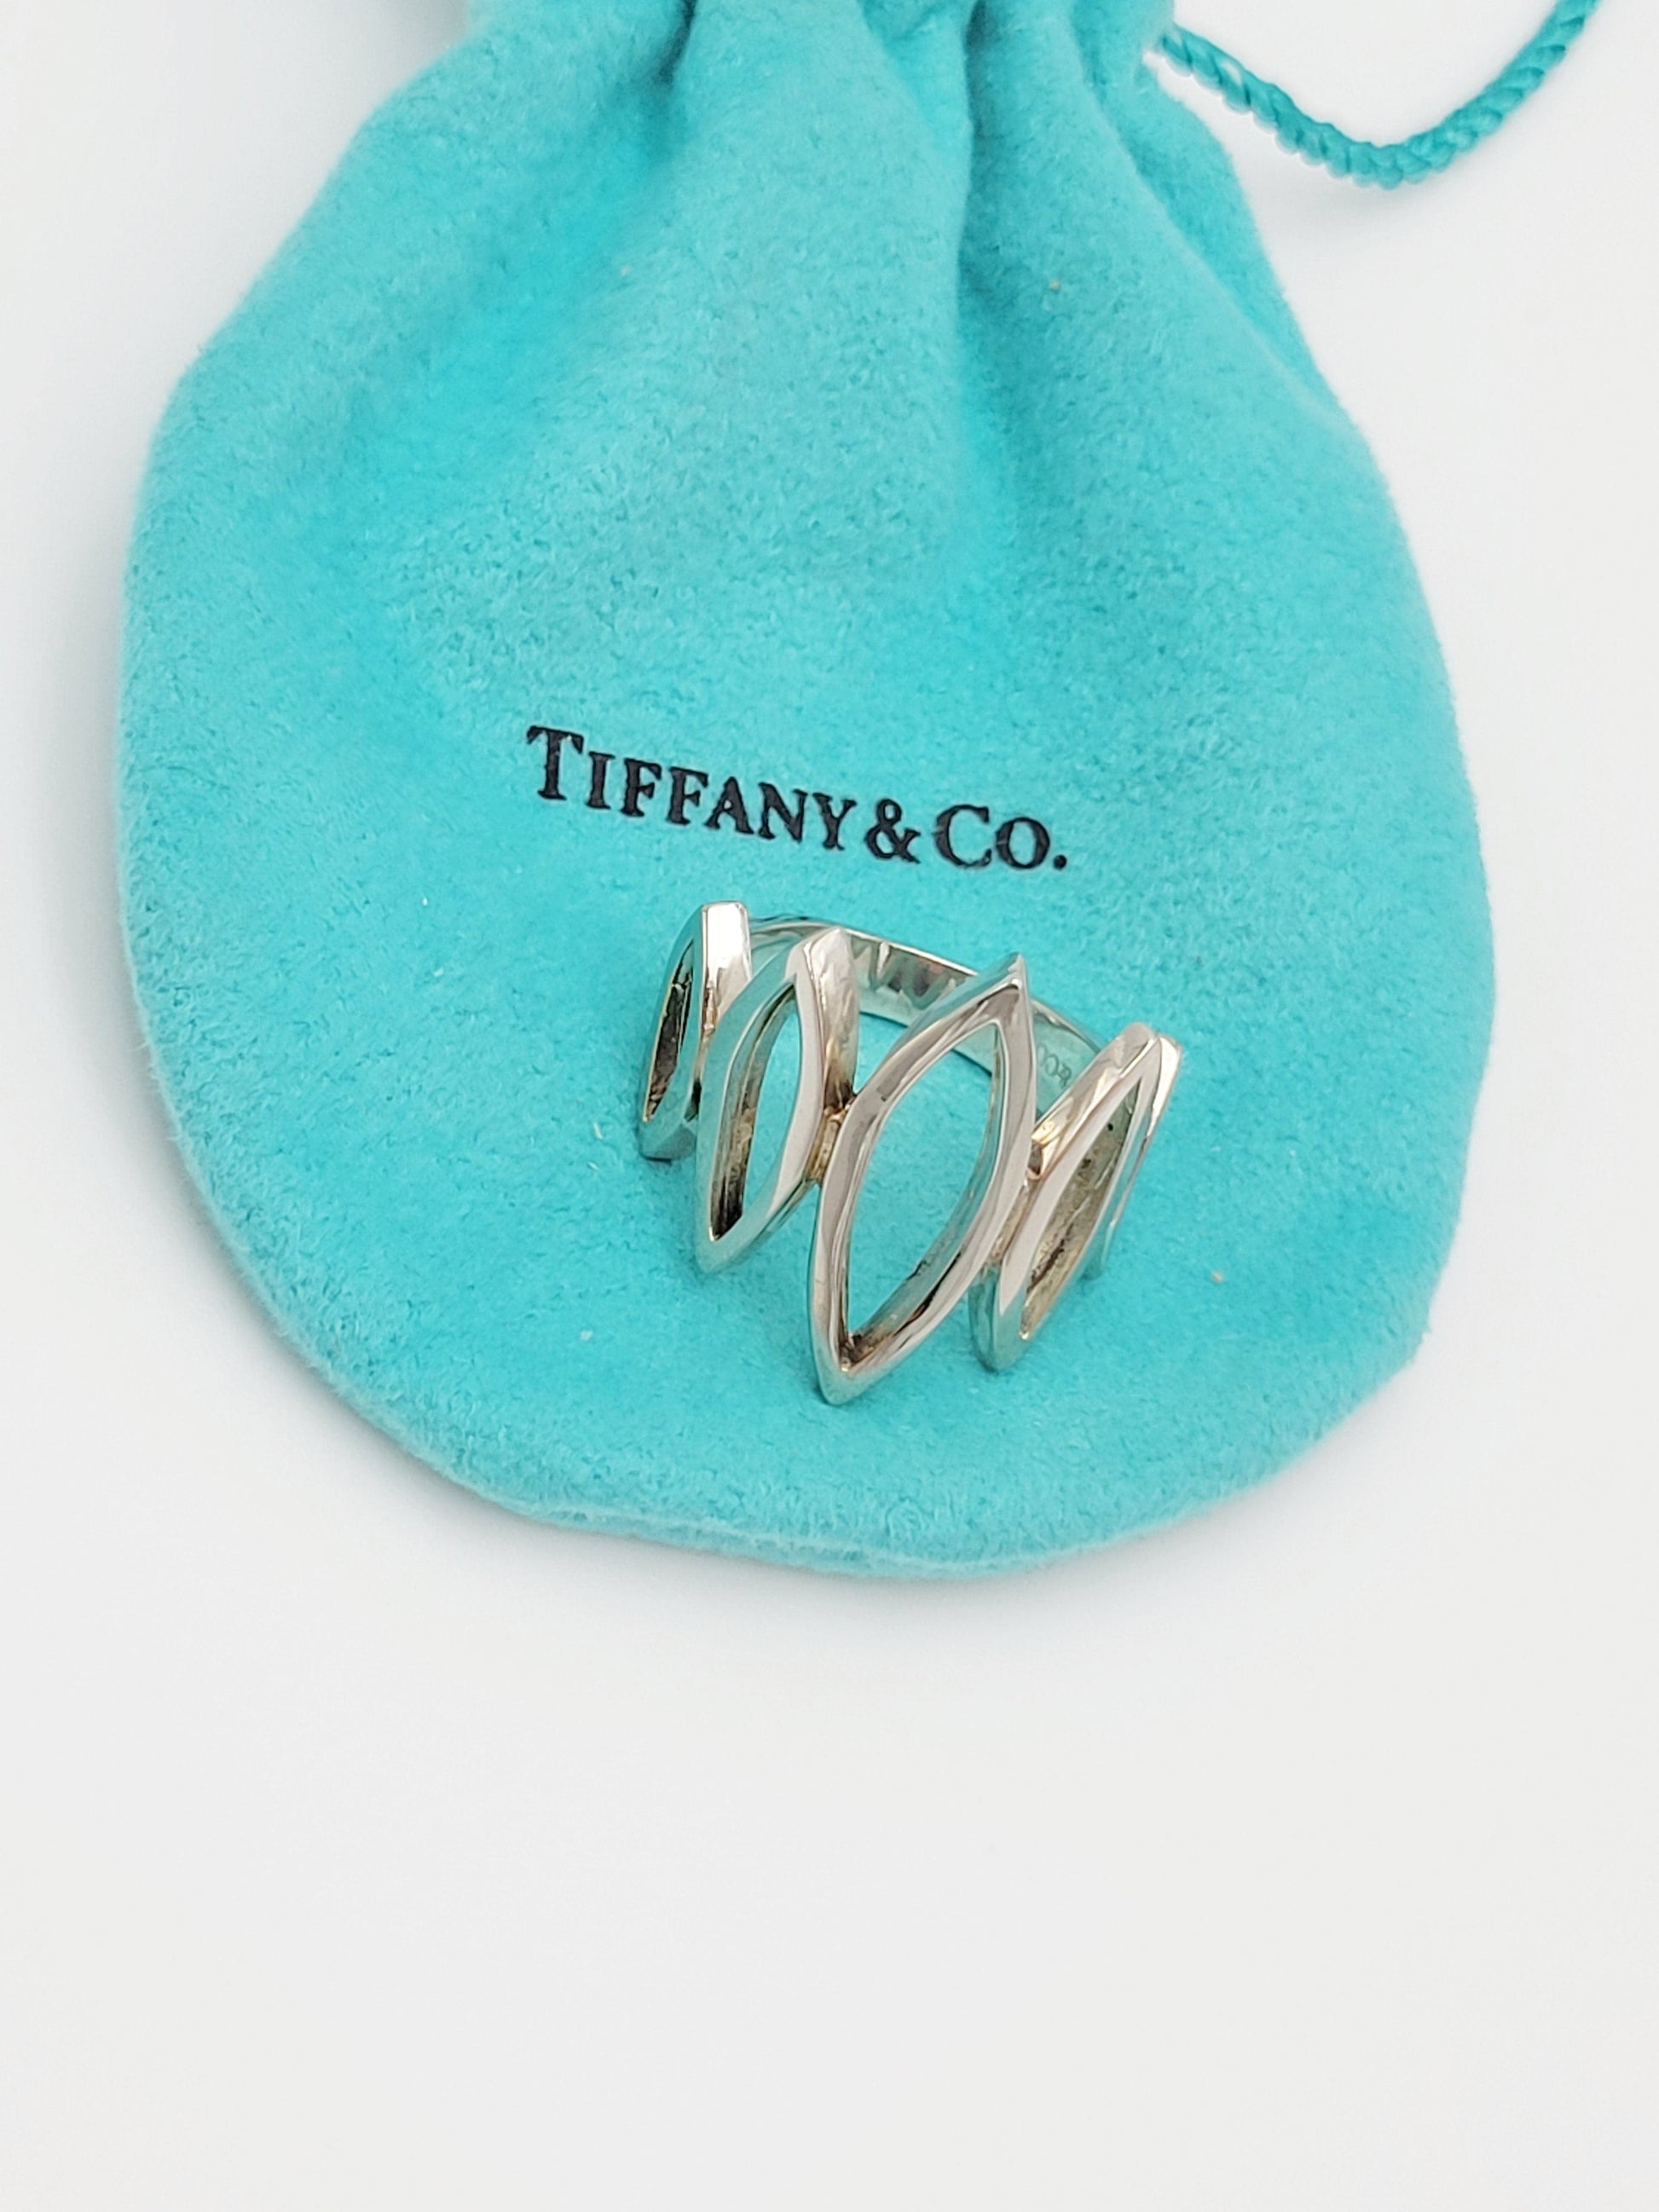 Tiffany & Co. Jewelry Tiffany & Co Sterling Large Modernist Architectural Ovals Cocktail Ring w/ Bag